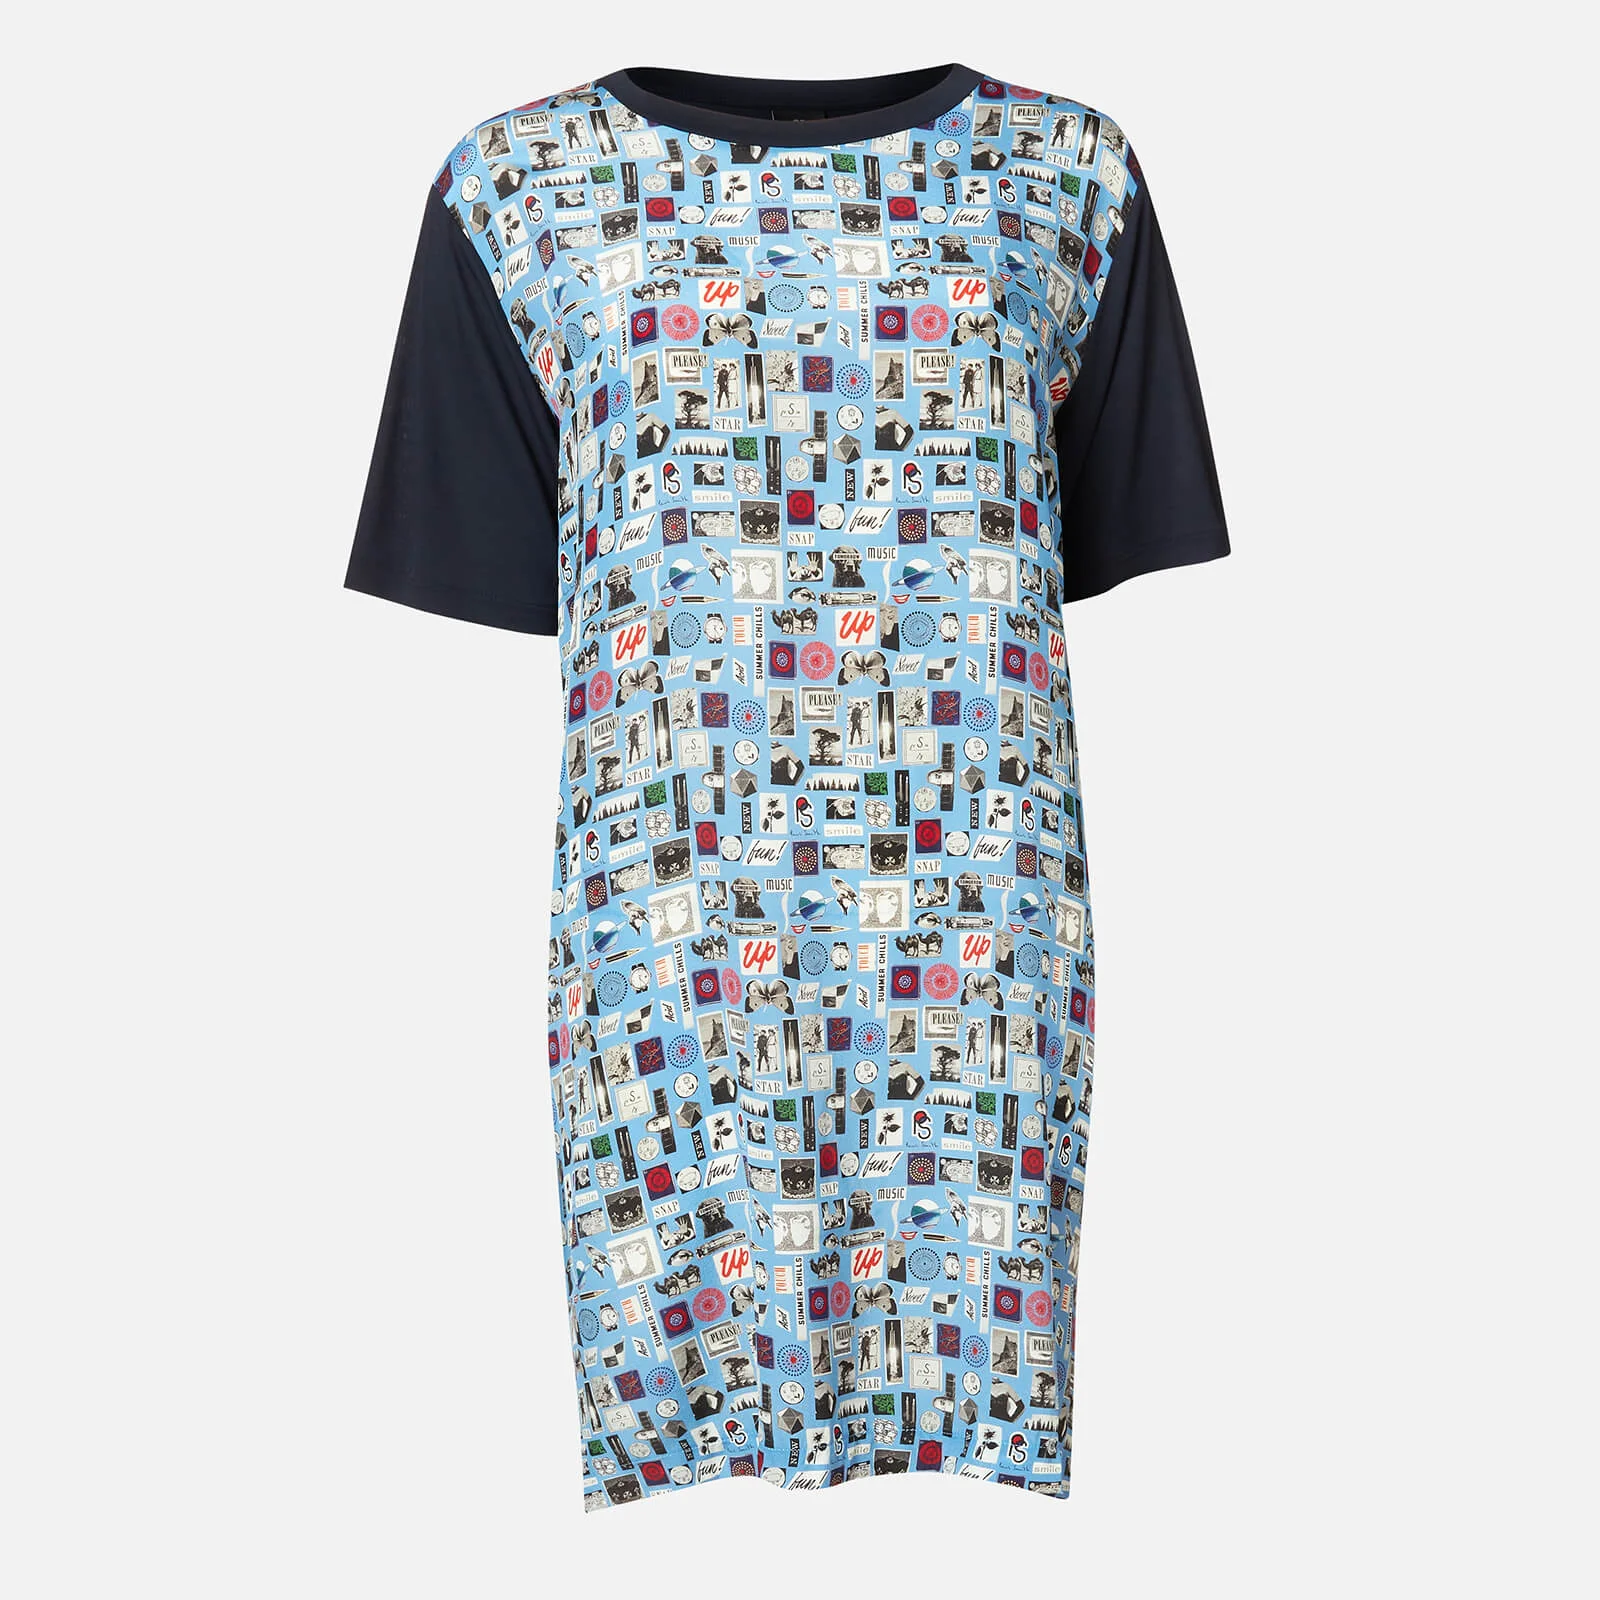 PS Paul Smith Women's Stamp Dress - Blue Image 1